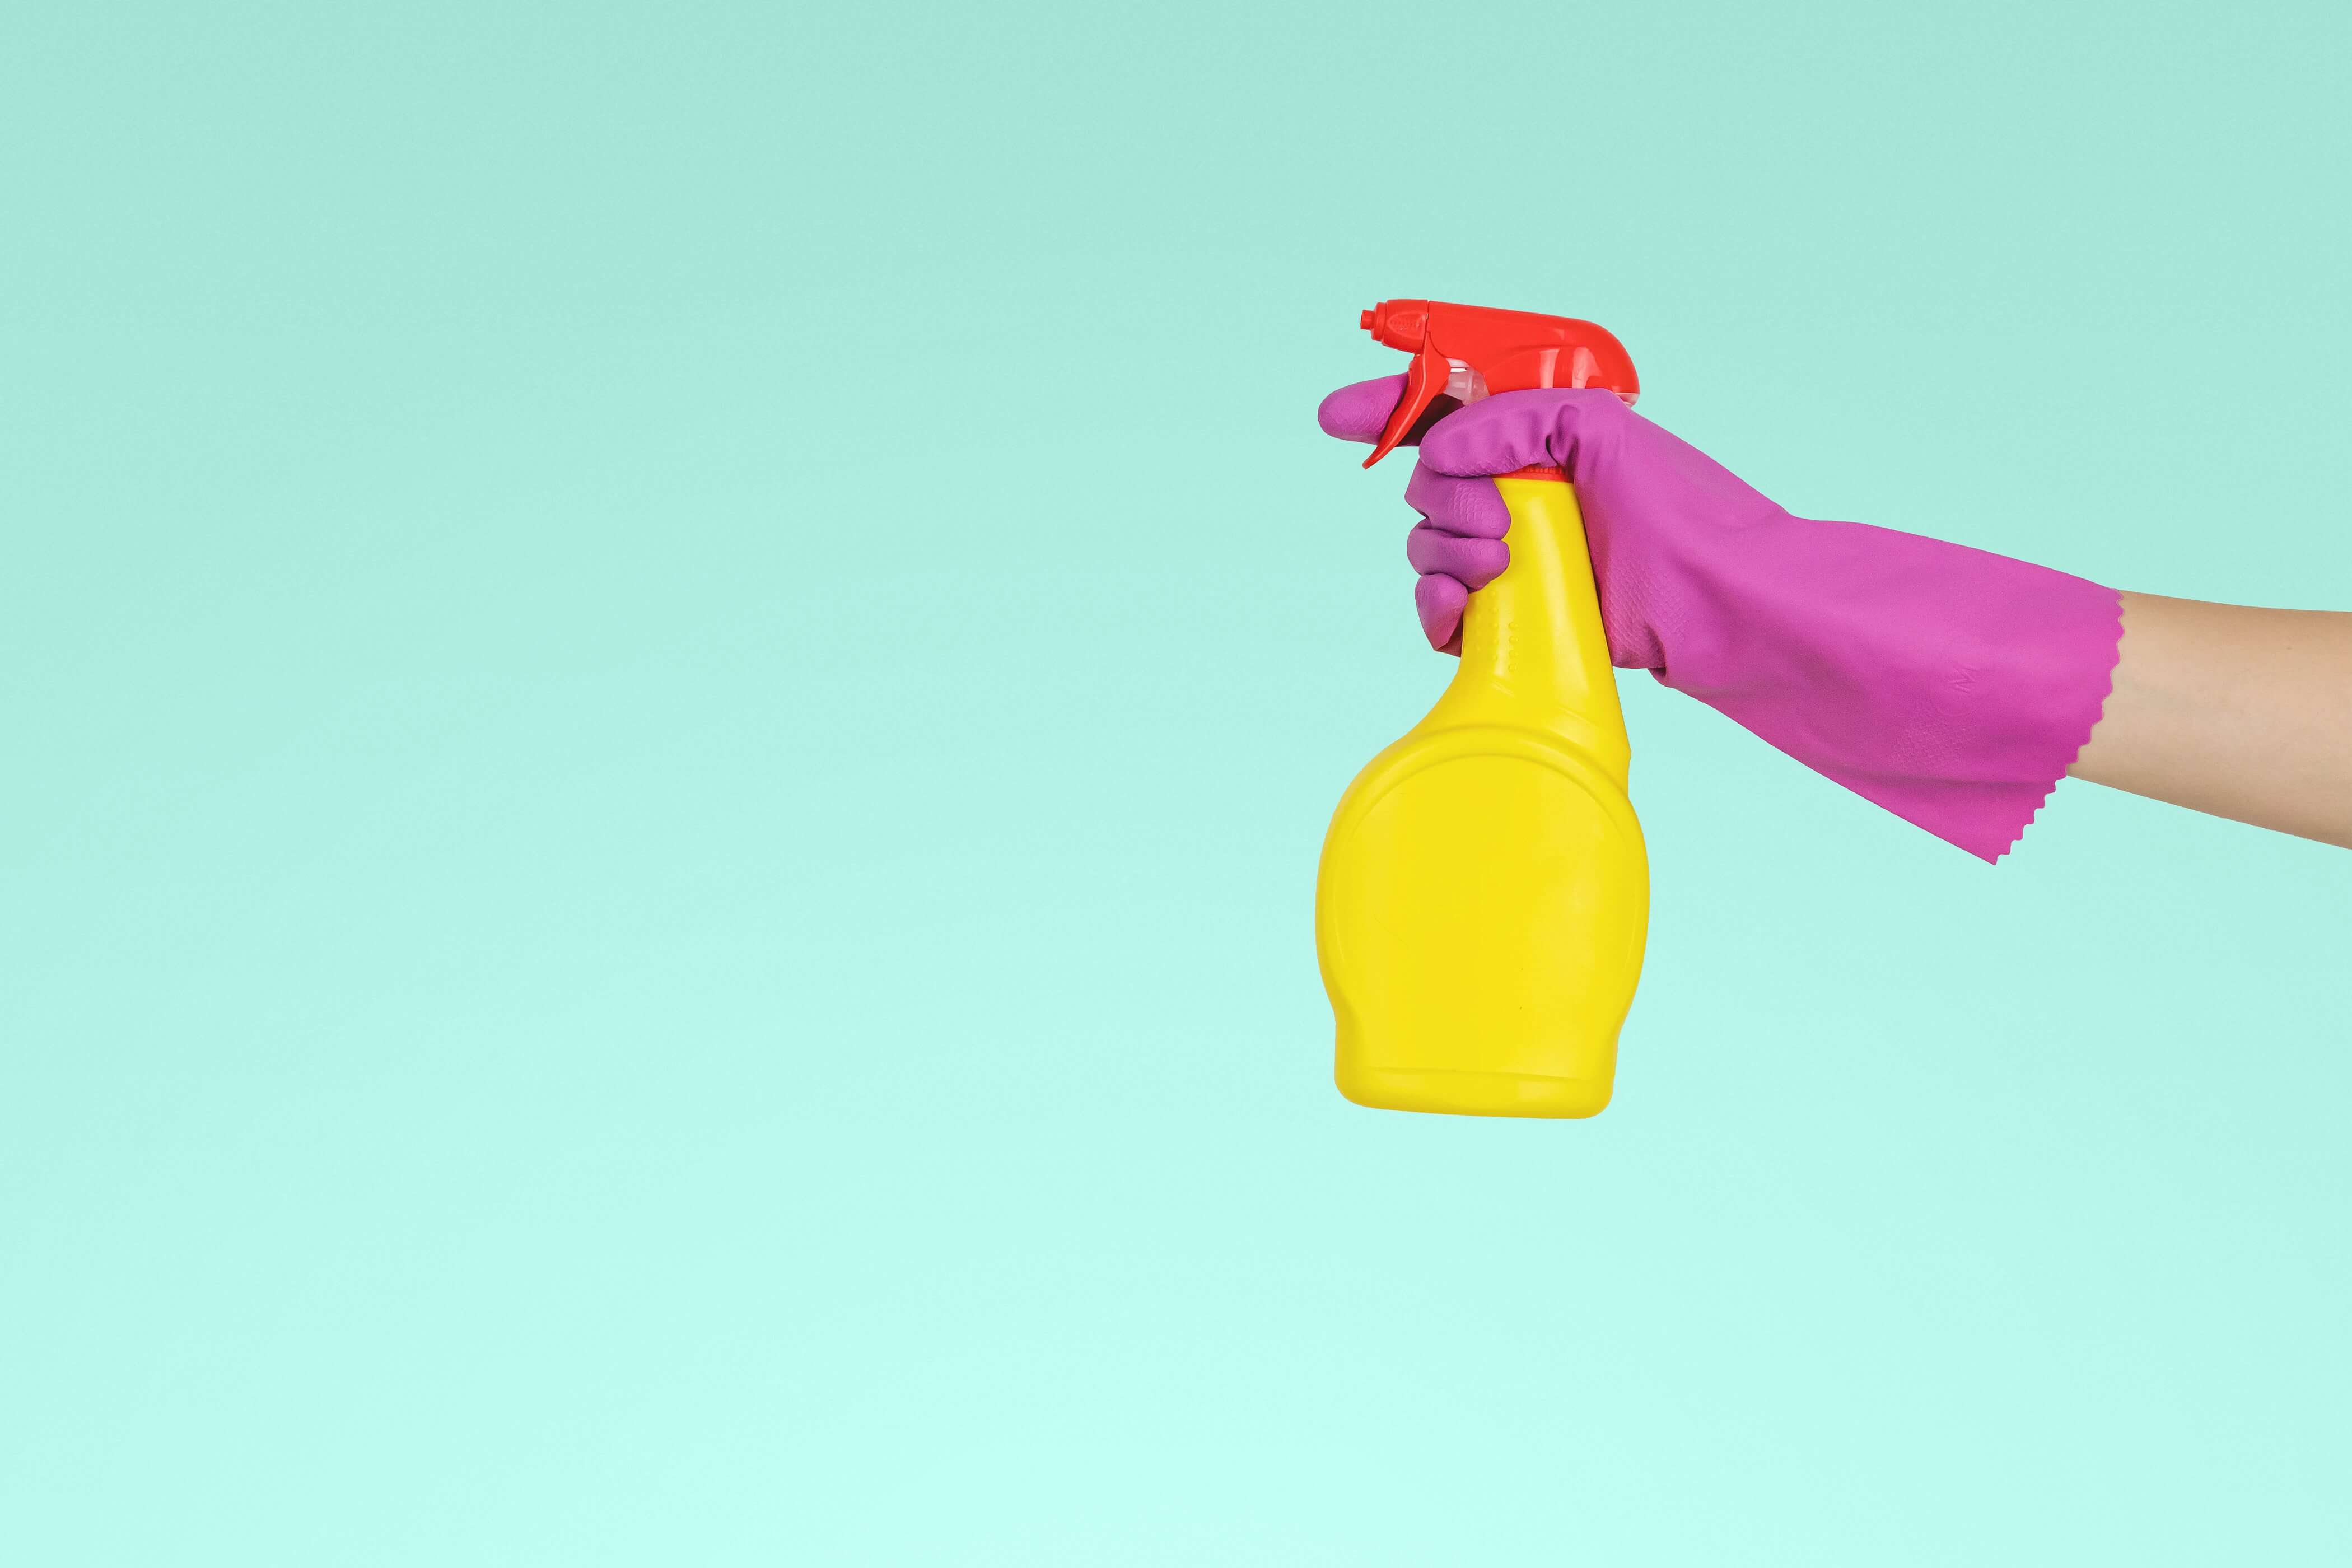 Someones hand in a pink rubber glove, holding a yellow spray bottle with cleaning products 